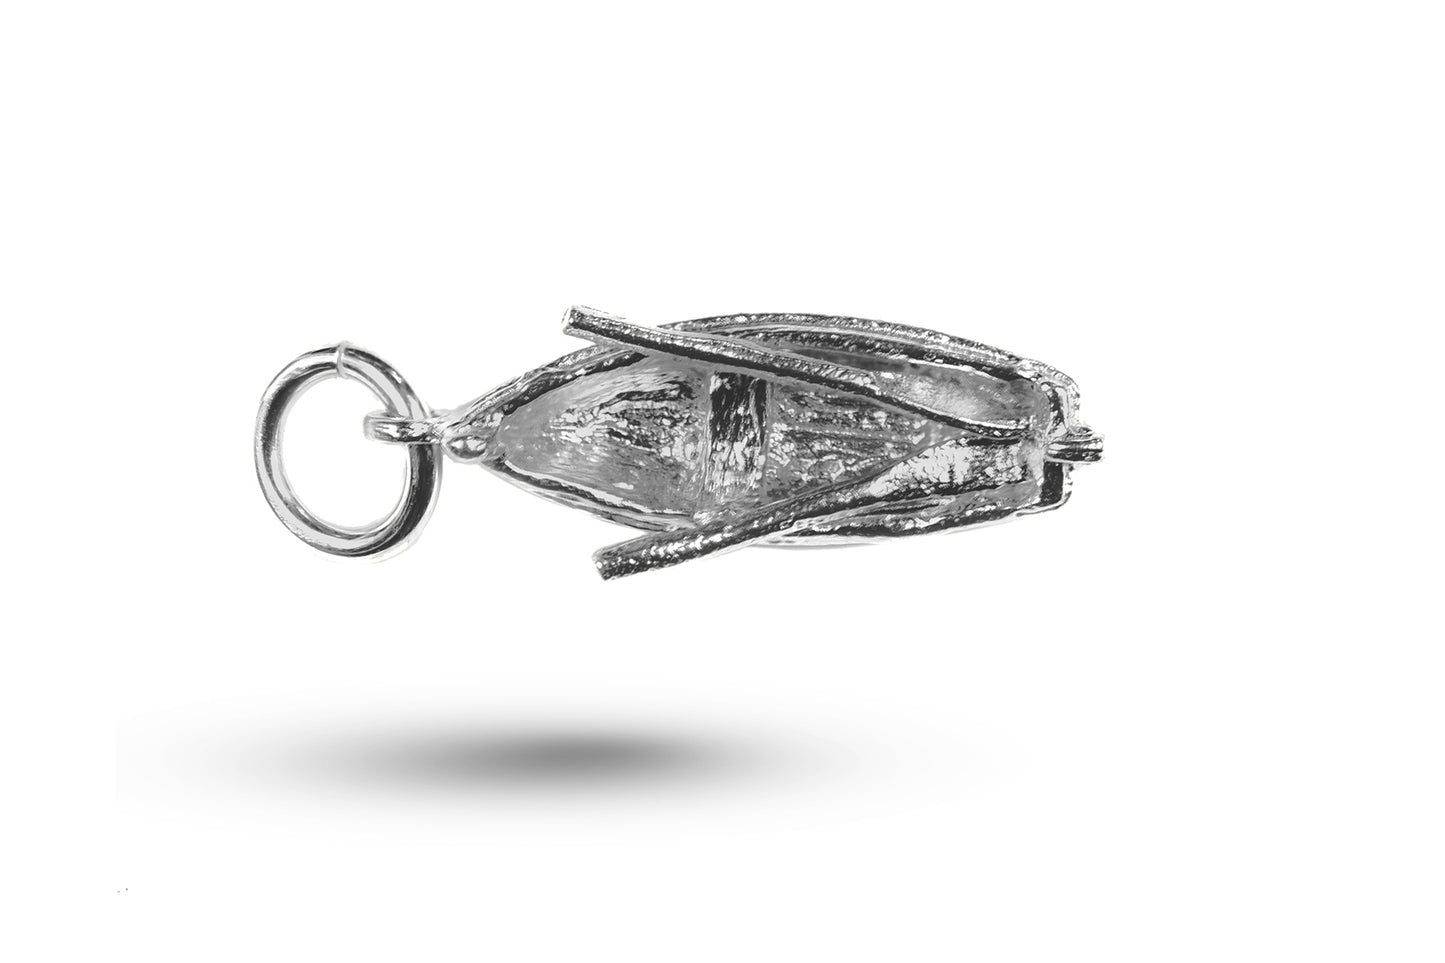 White gold Rowing Boat charm.